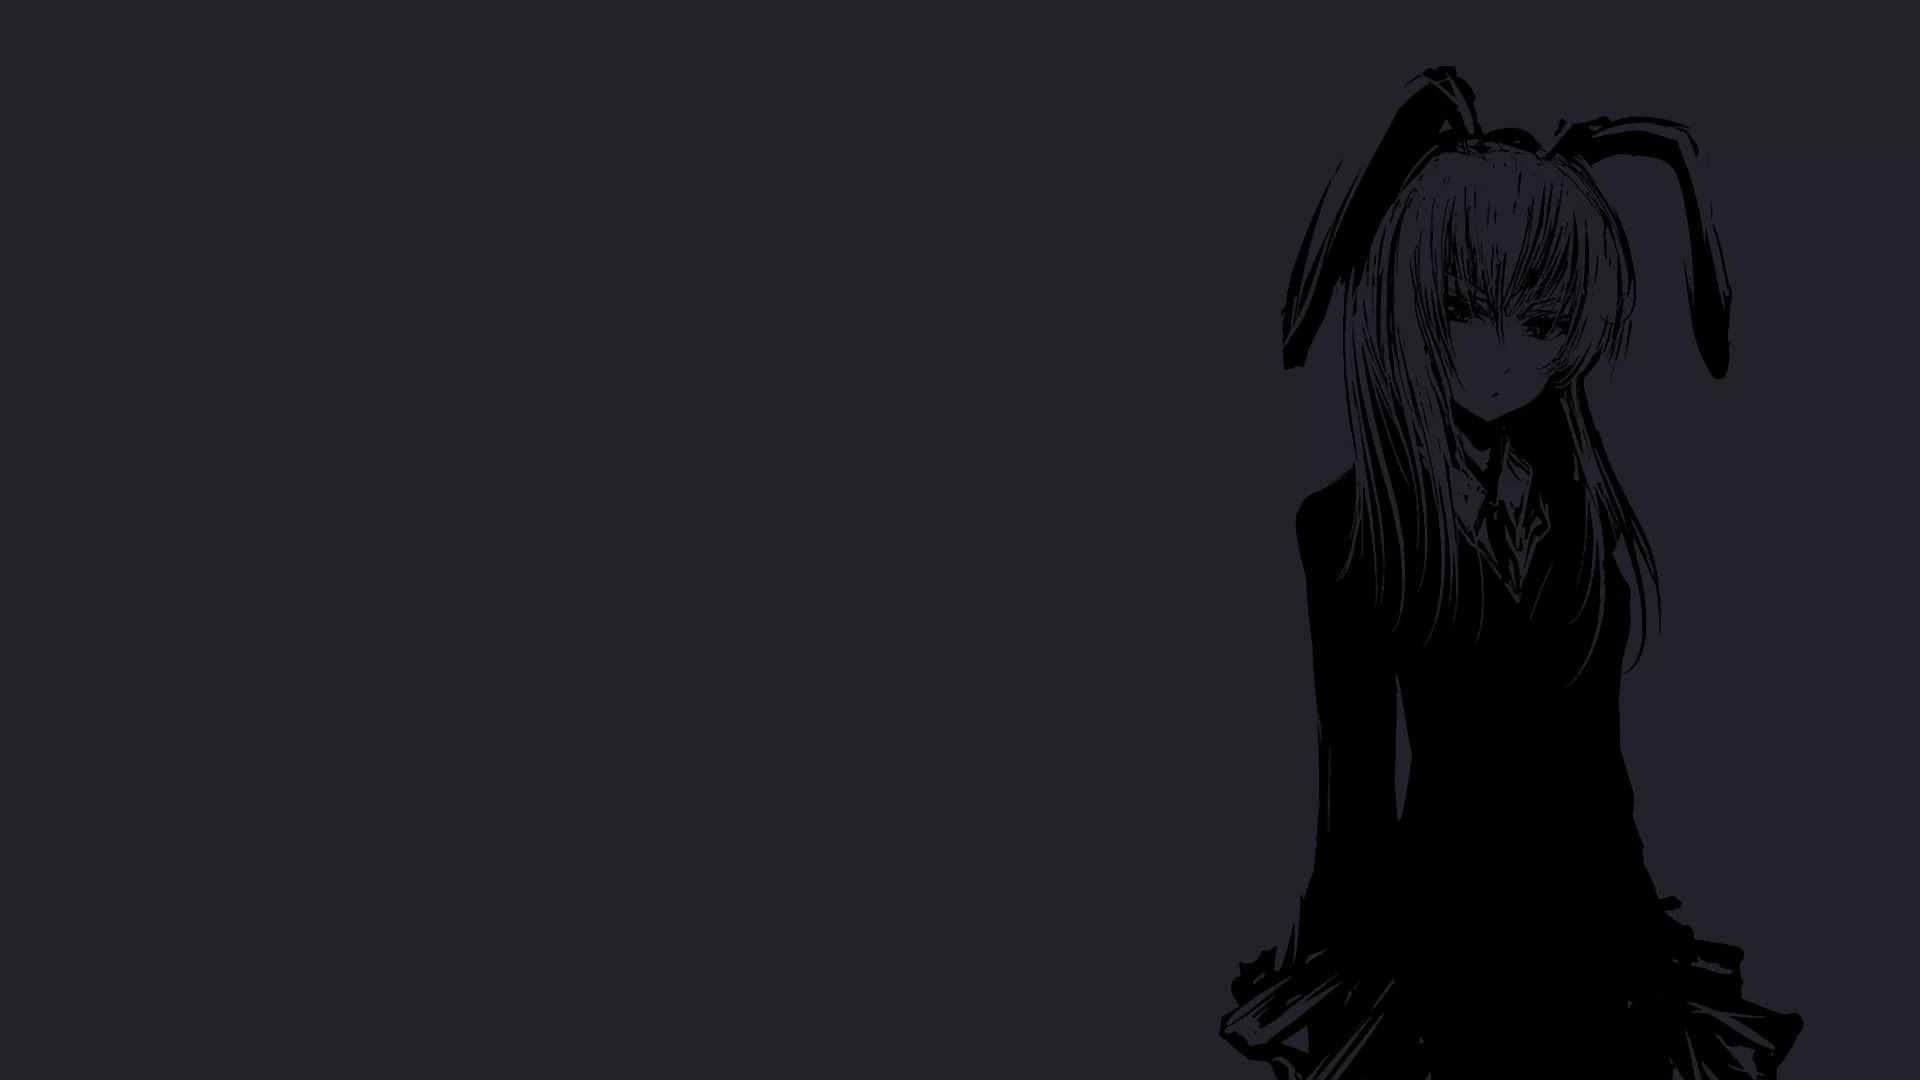 Discord Banner Anime - Free Vectors & PSDs to Download